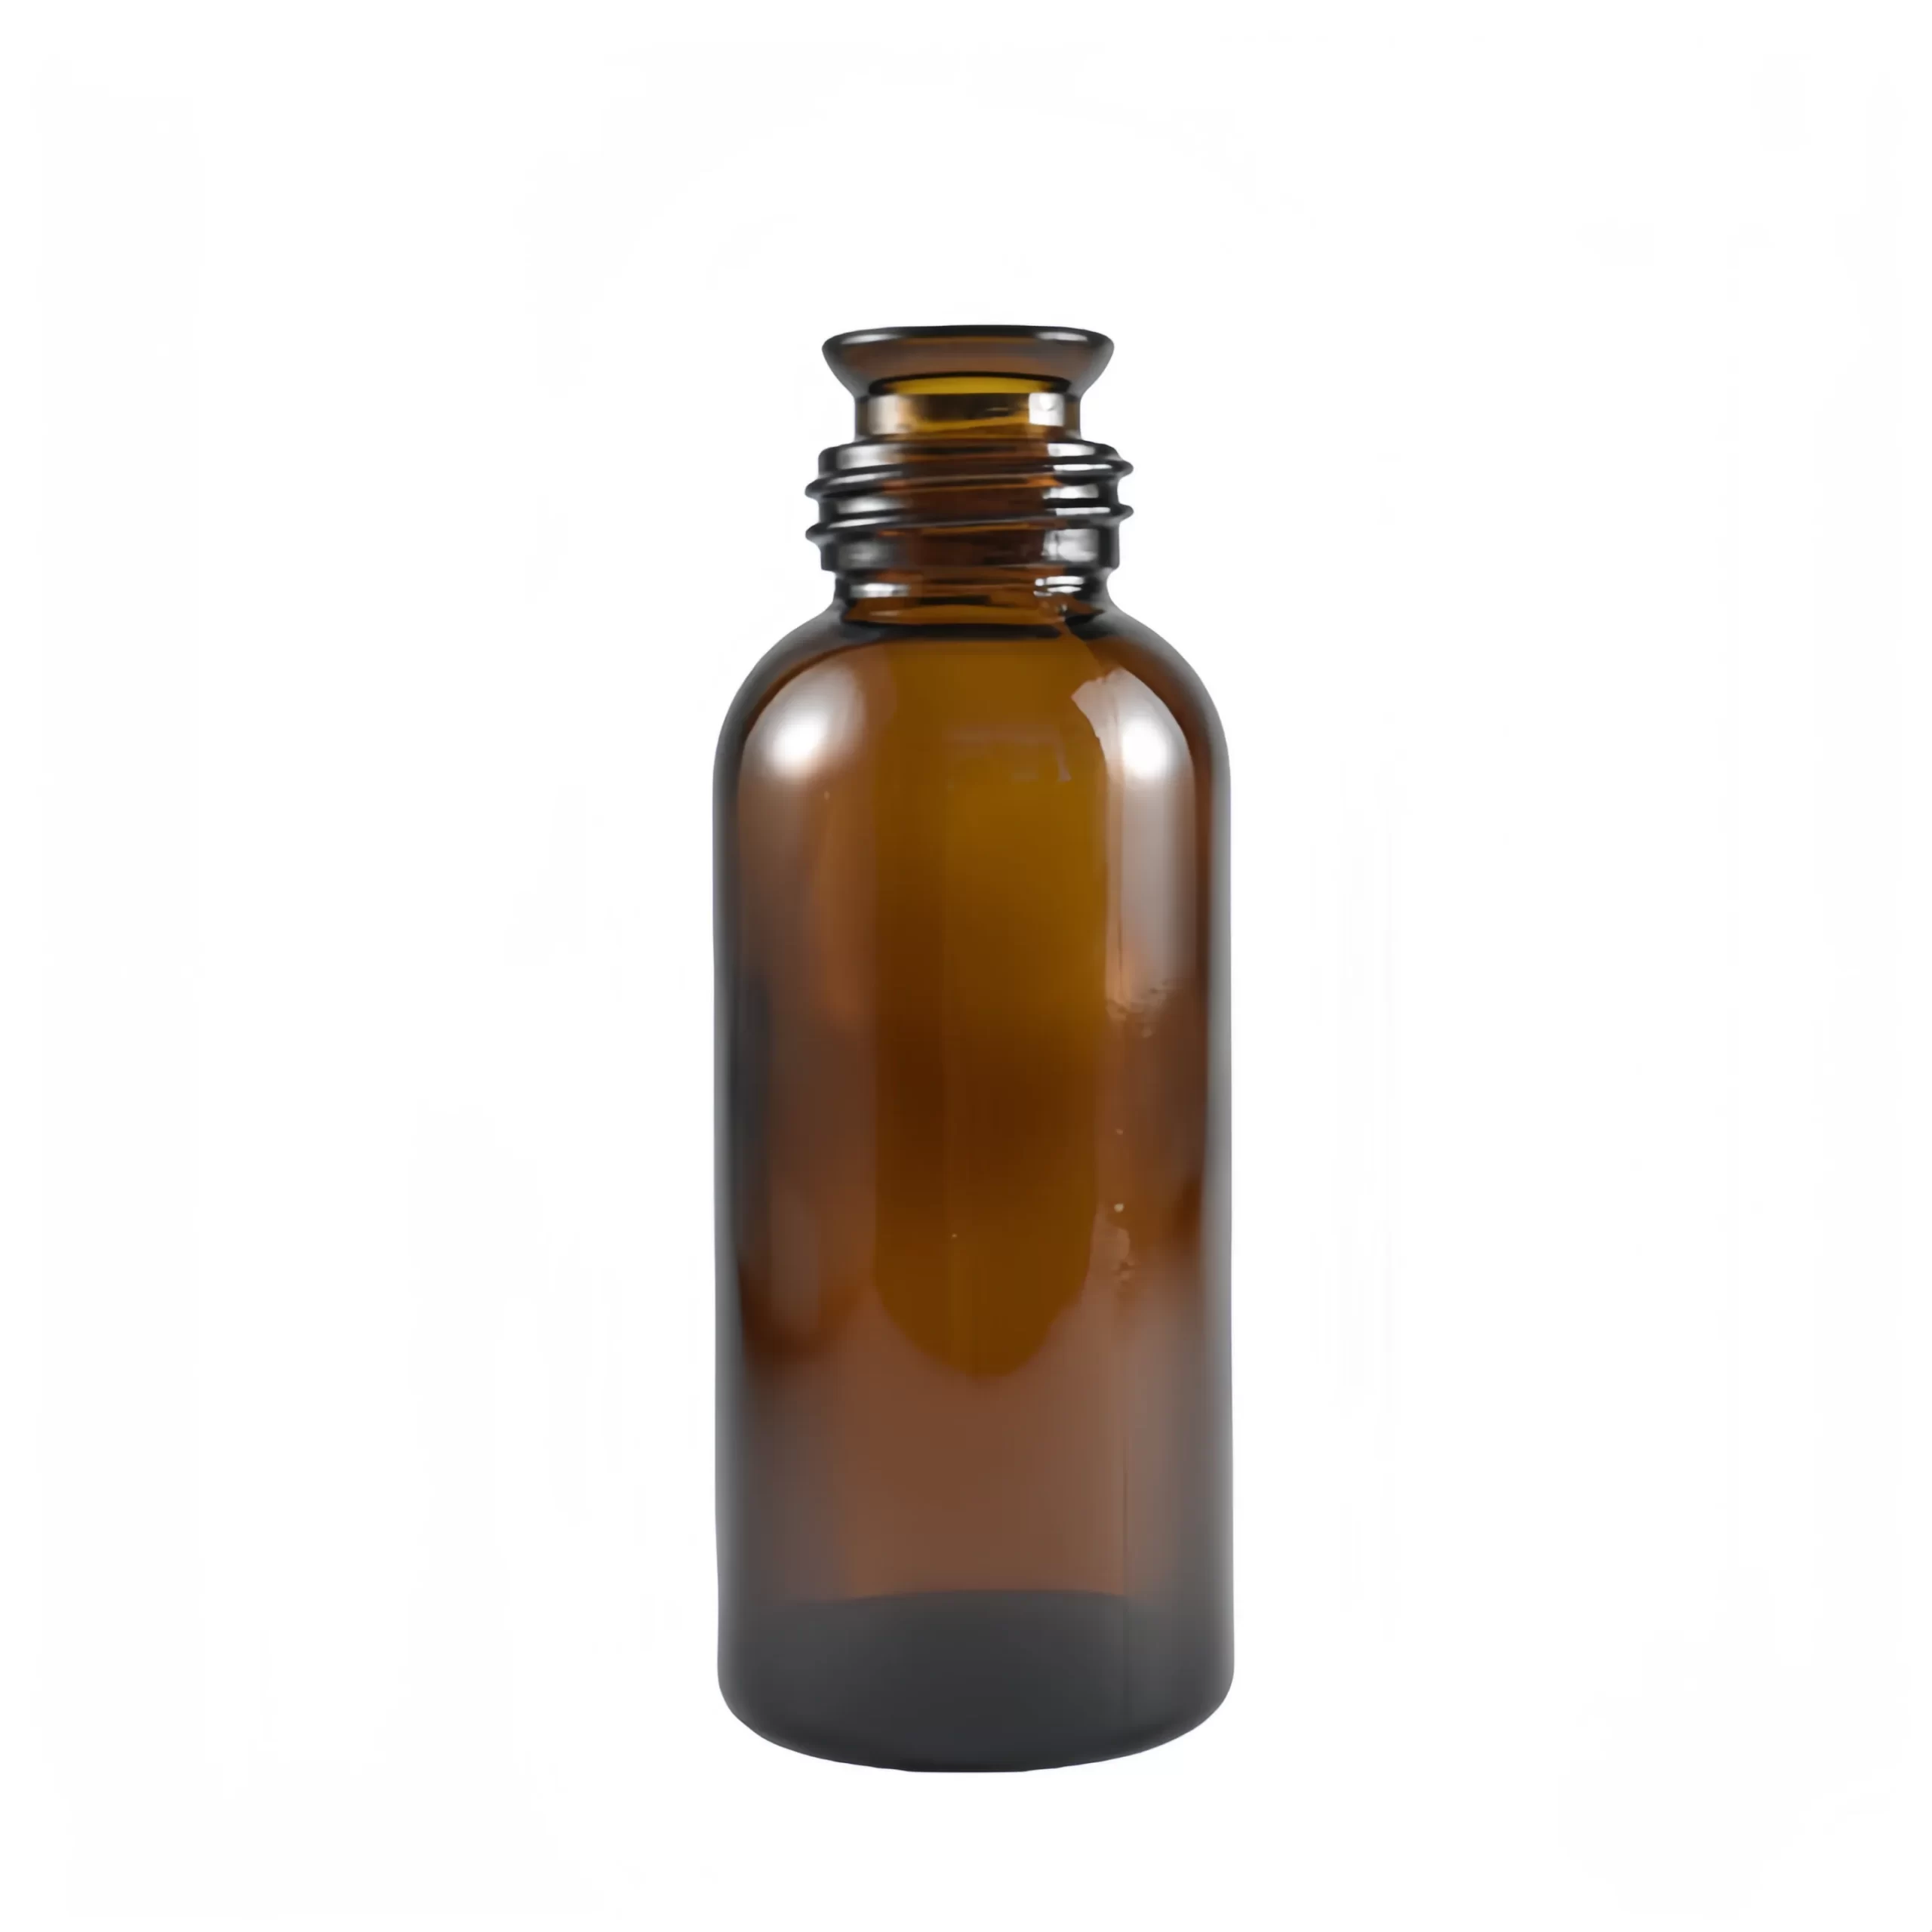 120ml pour out round glass bottle